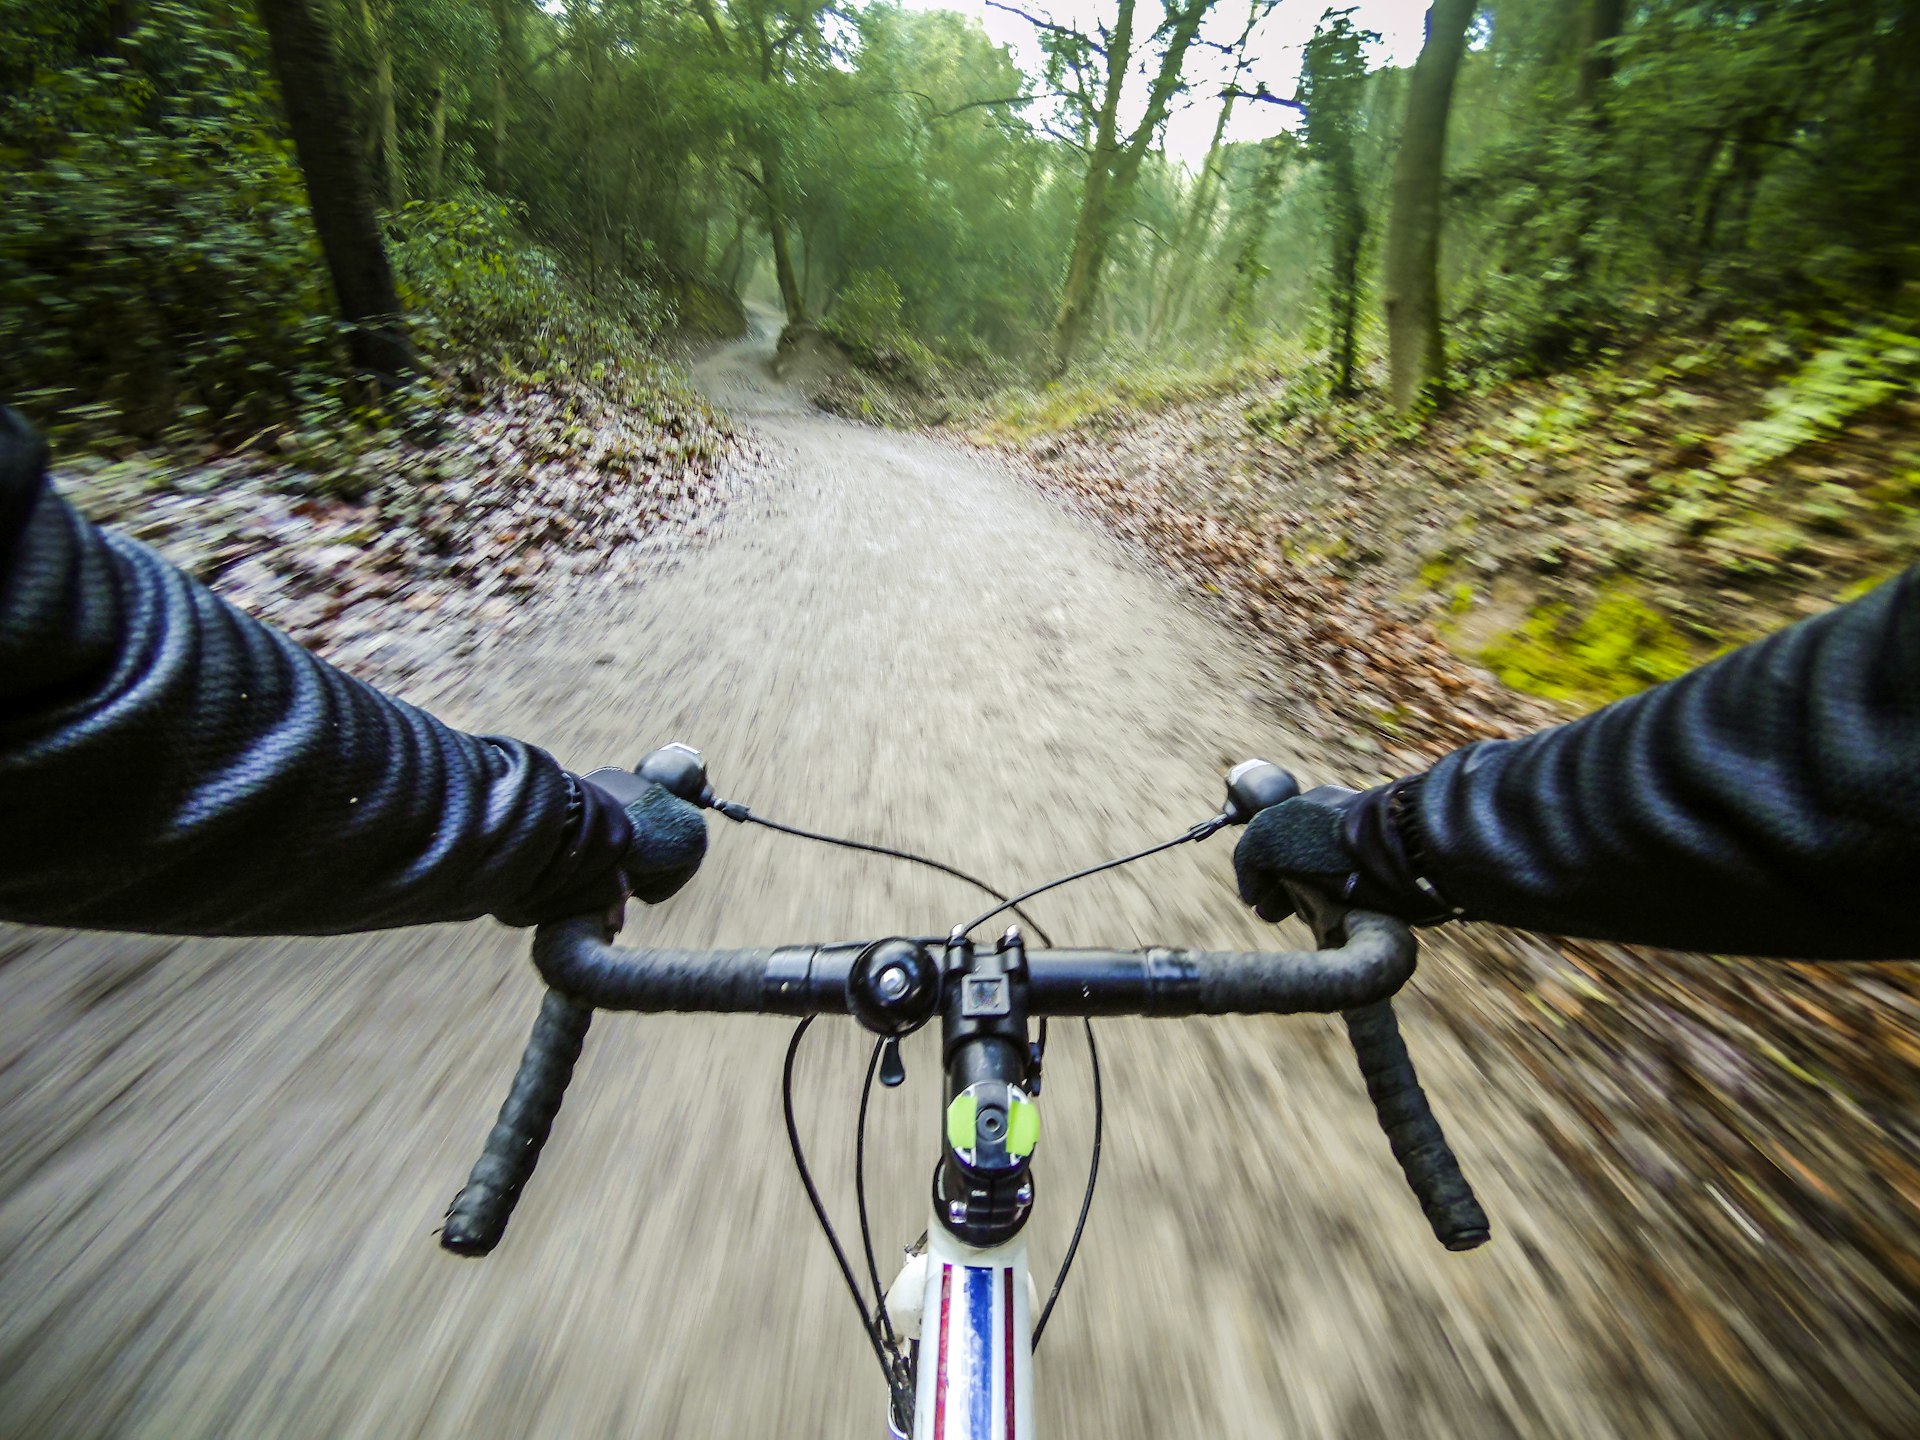 An onboard camera captures the moment when a cyclist rides through the forests of Collserola, a natural park near the city of Barcelona.